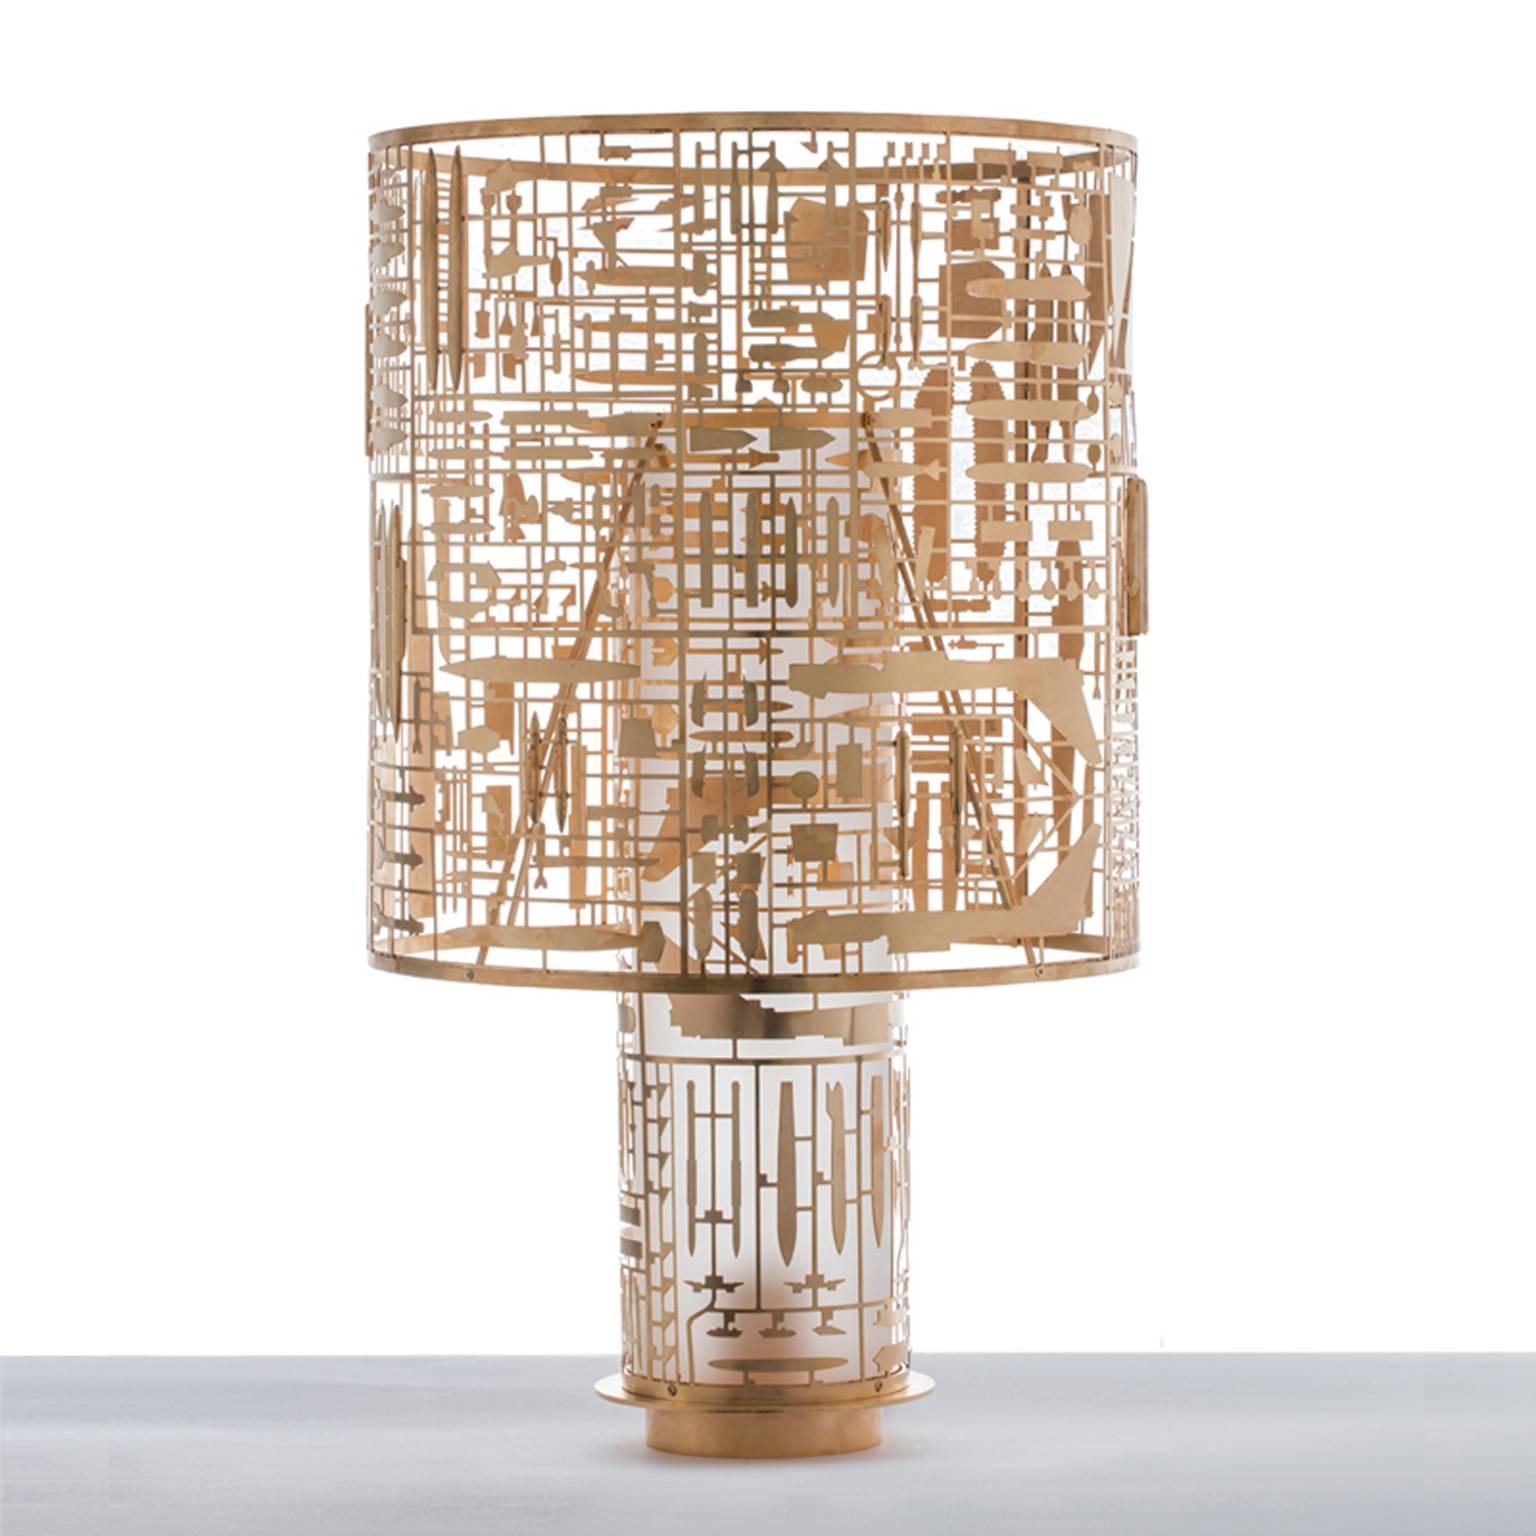 Disarmante (“Disarming”) is the table lamp by Gio Tirotto for the collection 